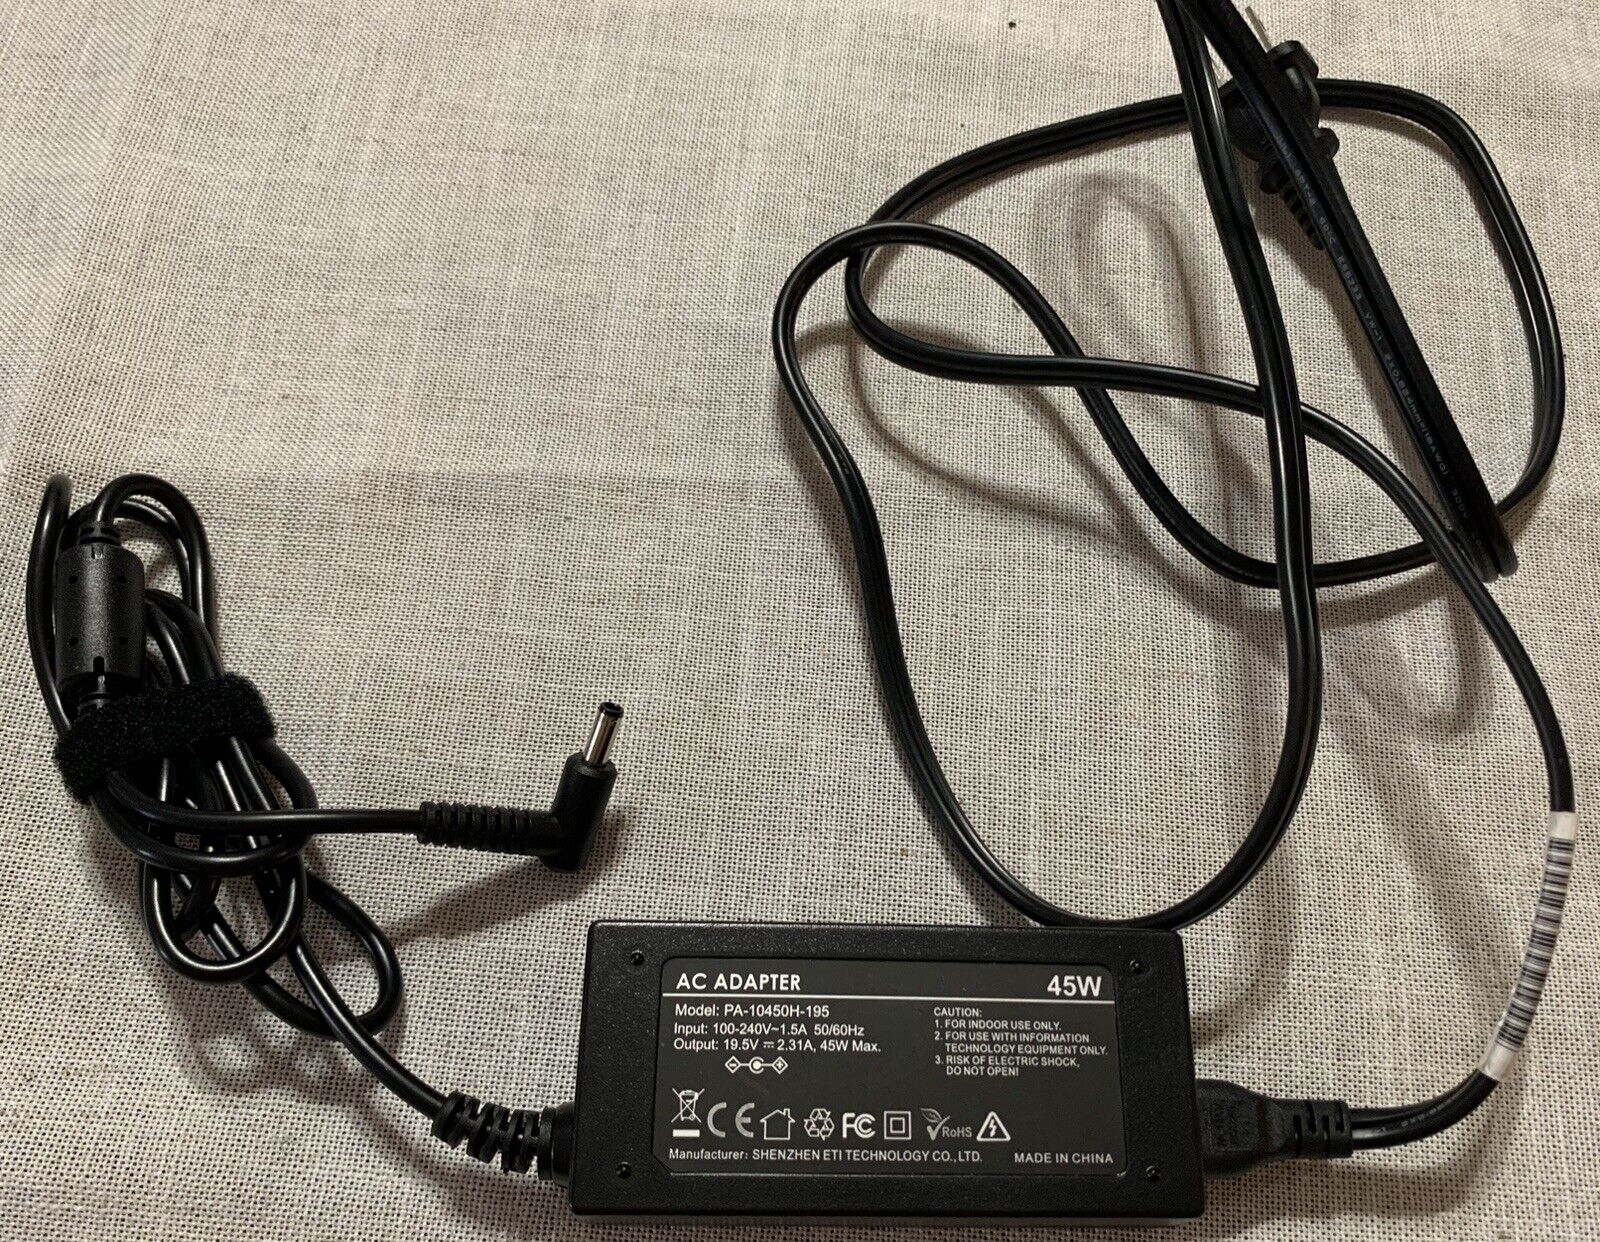 New AC Adapter PA-10450H-195 45W 100-240V 1.5A 50/60Hz Replacement Charger